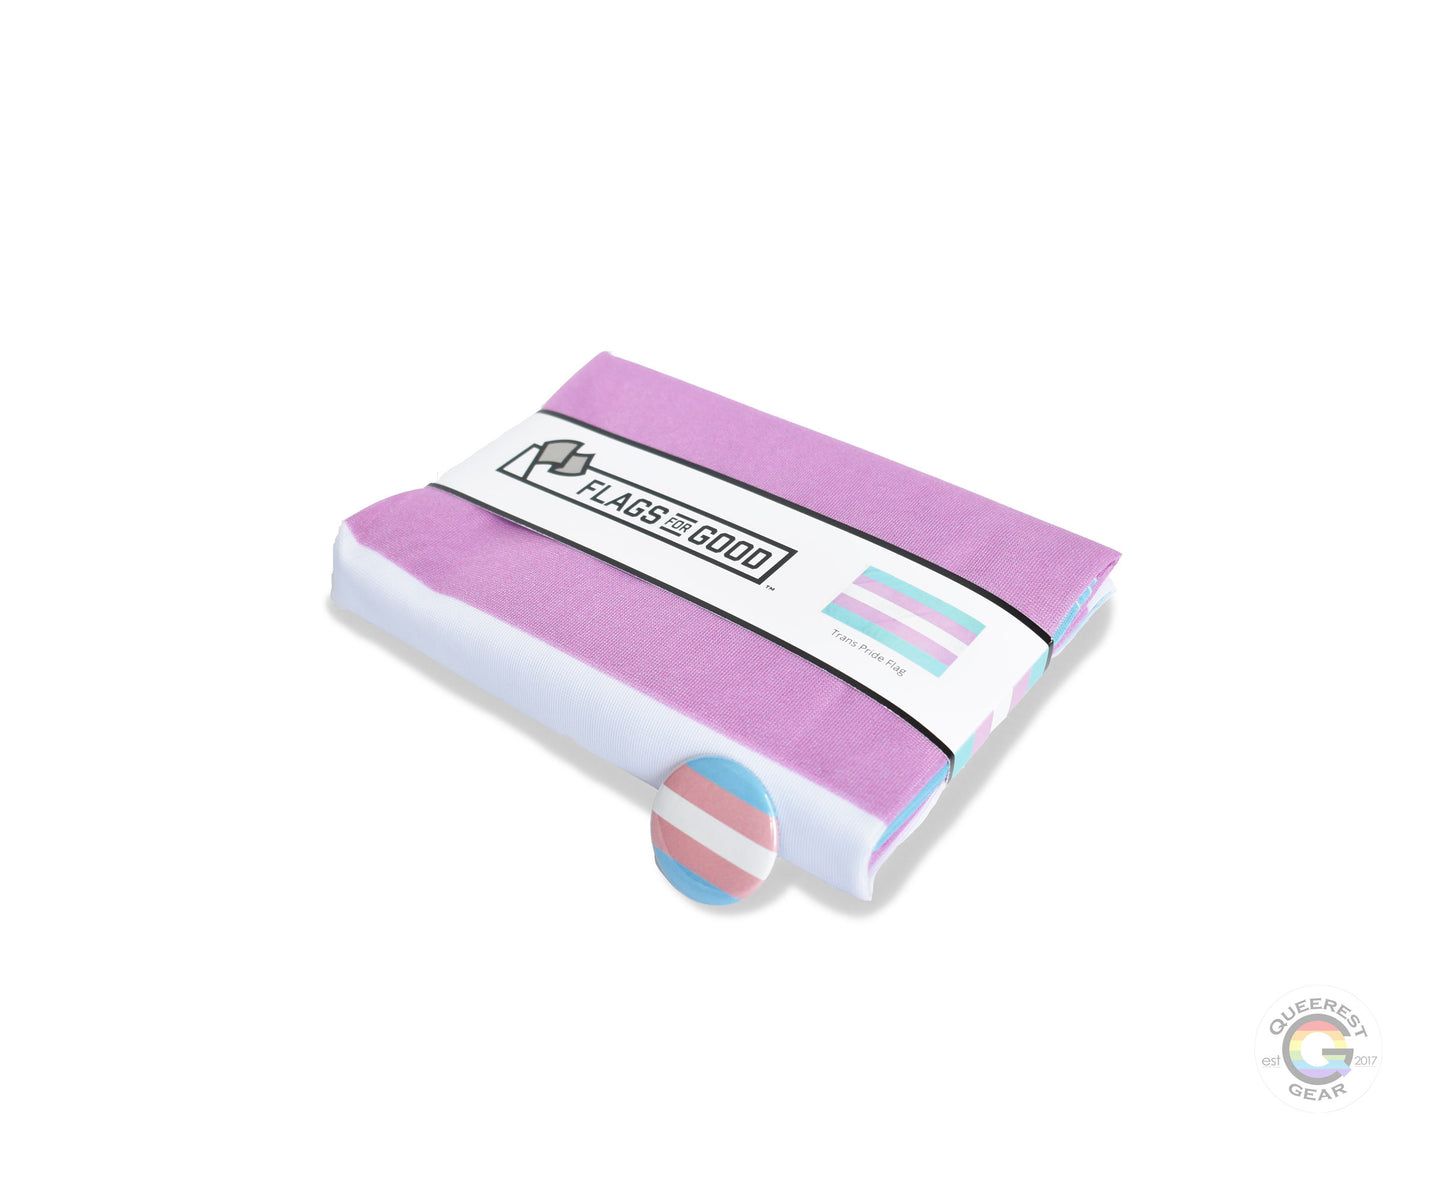  The transgender pride flag folded in its packaging with the matching free transgender flag button